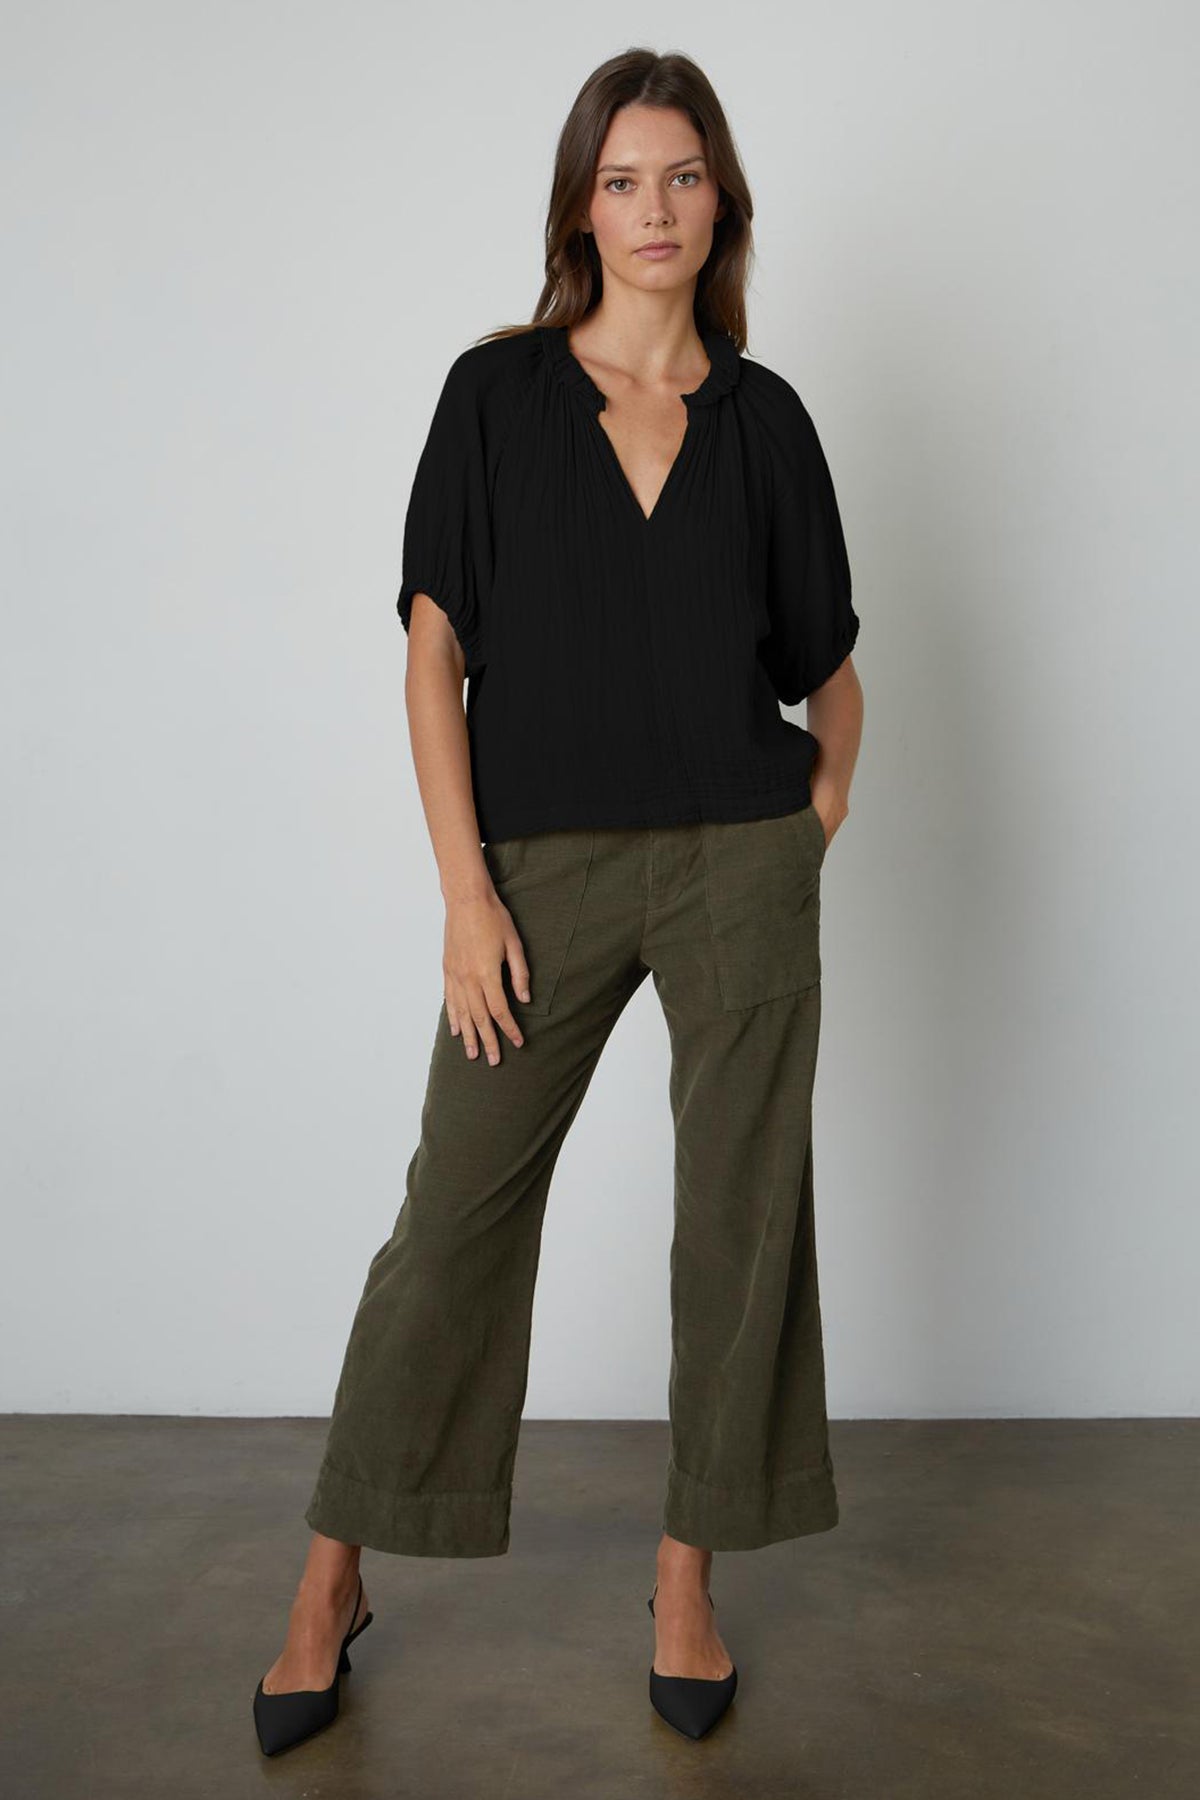   The model is wearing a black blouse and Velvet by Graham & Spencer's VERA CORDUROY WIDE LEG PANT in olive green. 